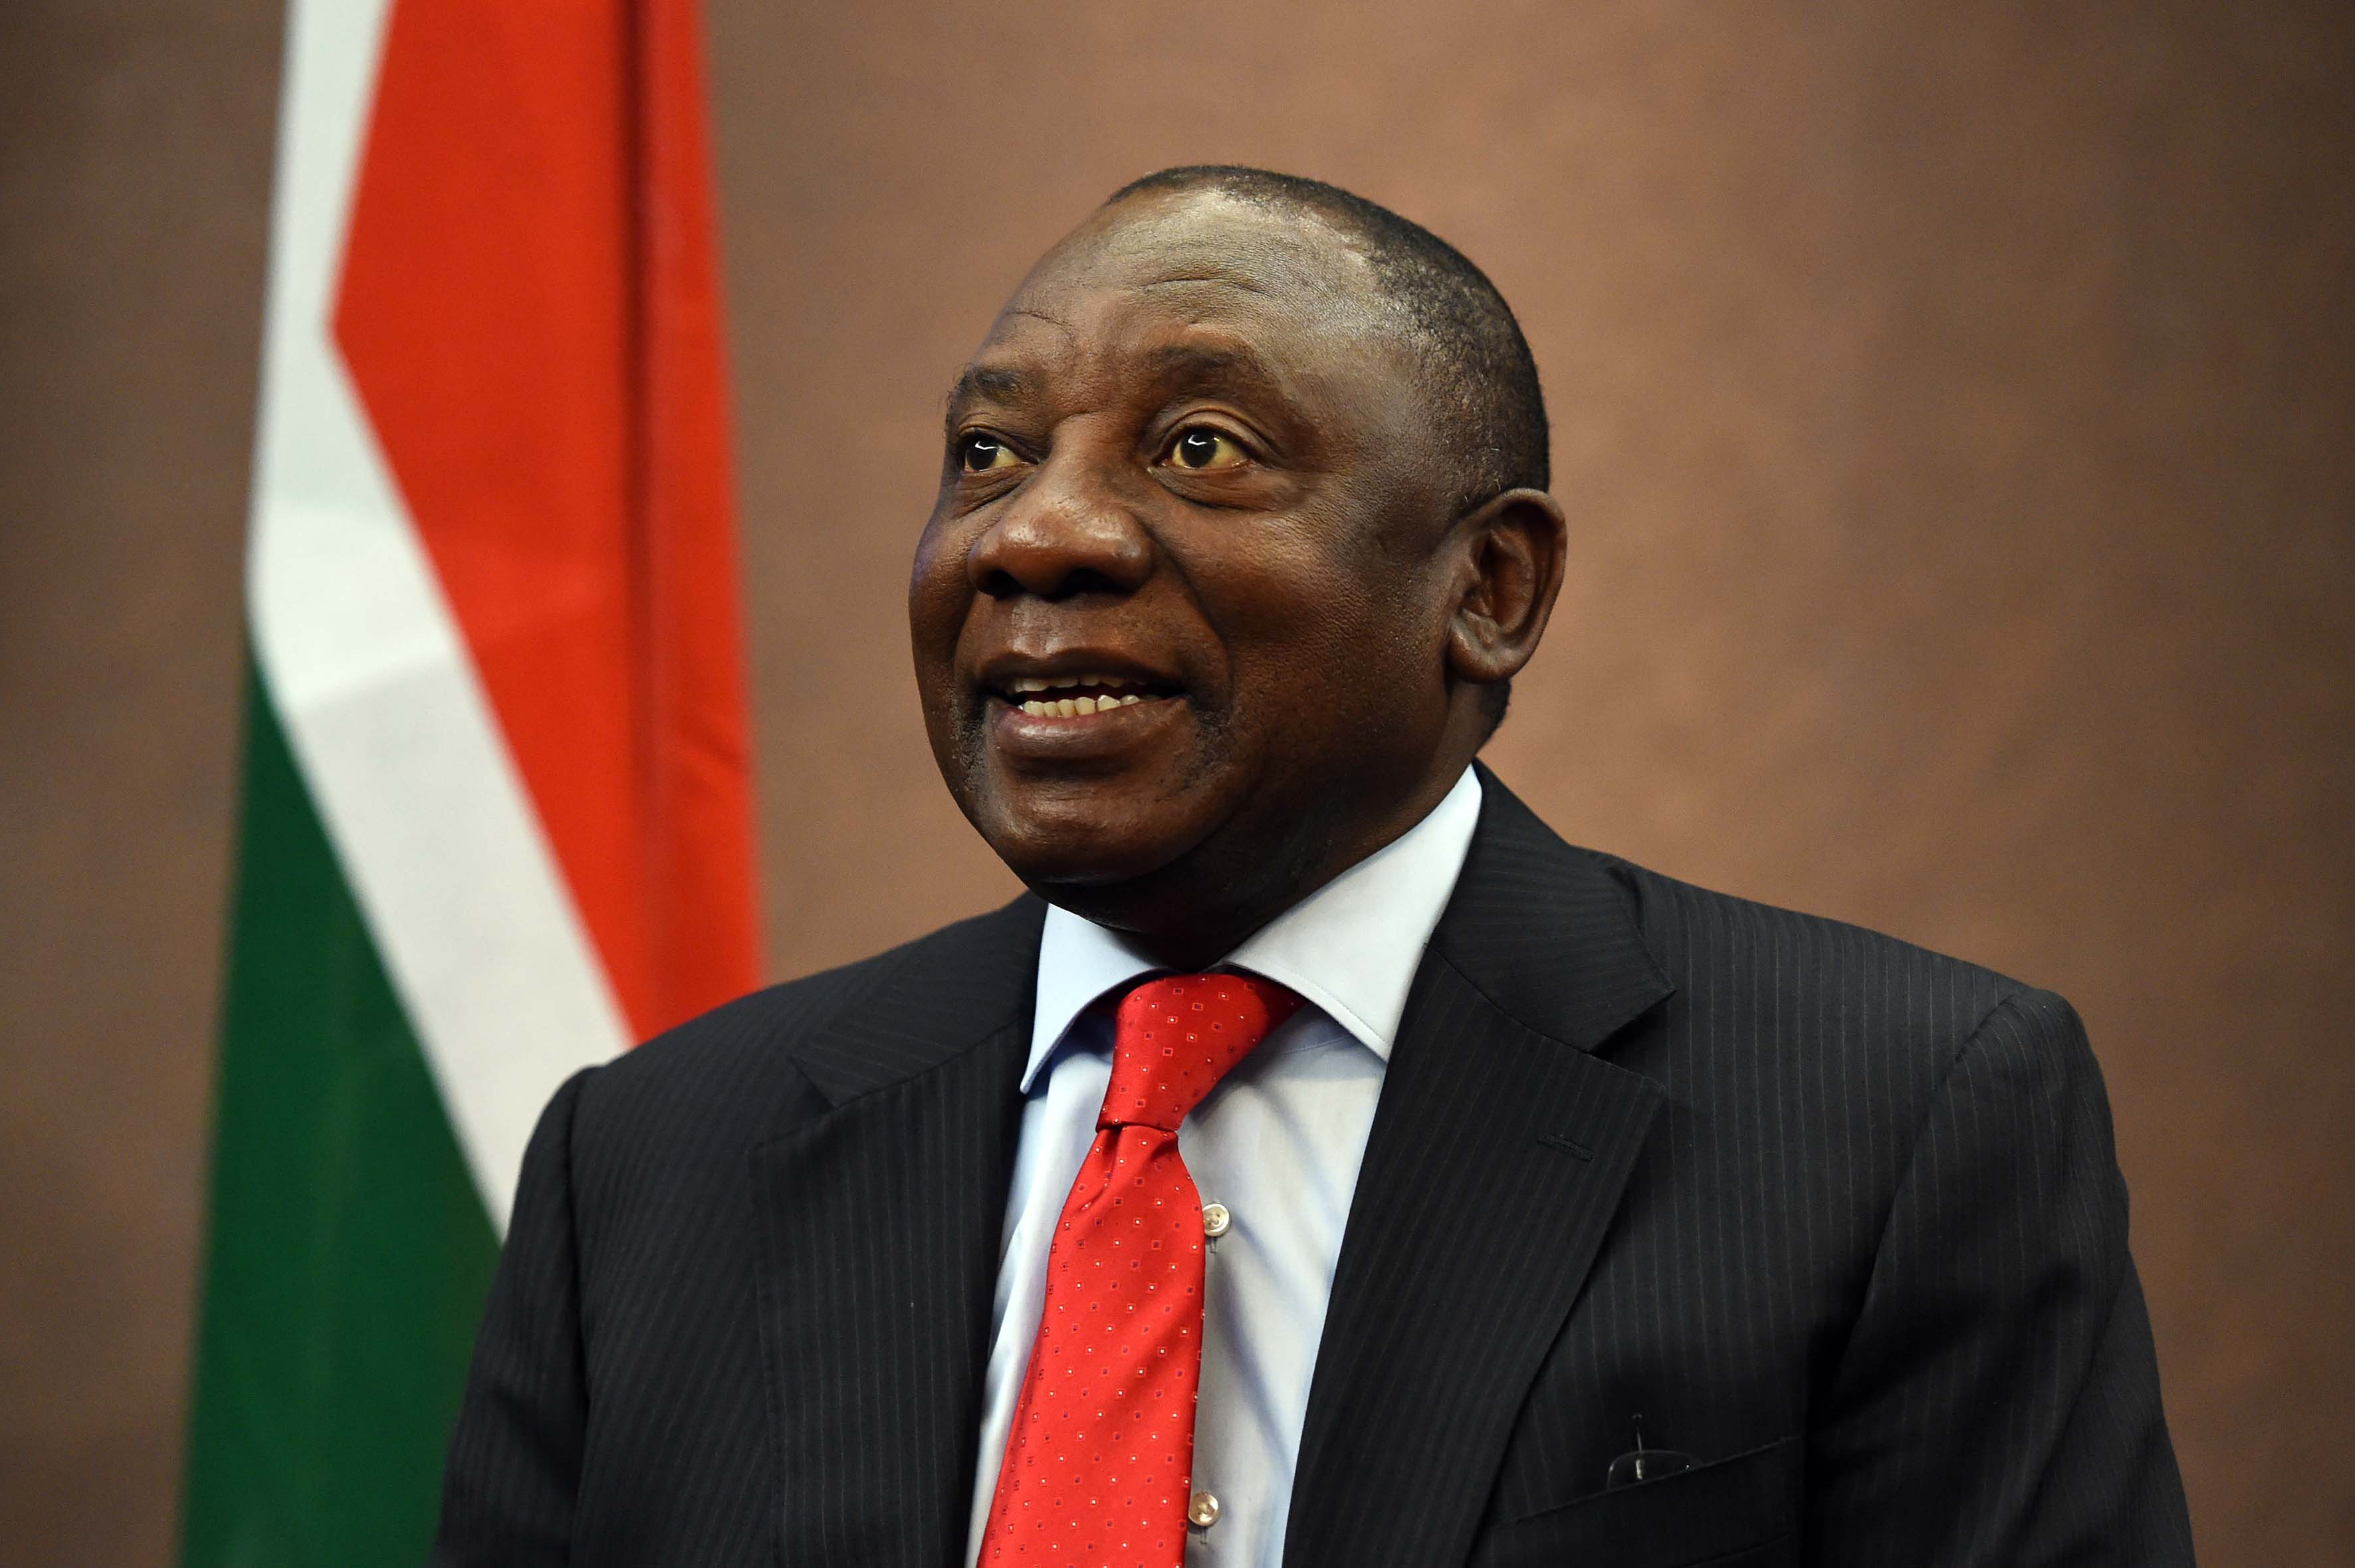 ALM AFRICAN OF THE YEAR NOMINEE, RAMAPHOSA WINS ANC’S PRESIDENTIAL POSITION